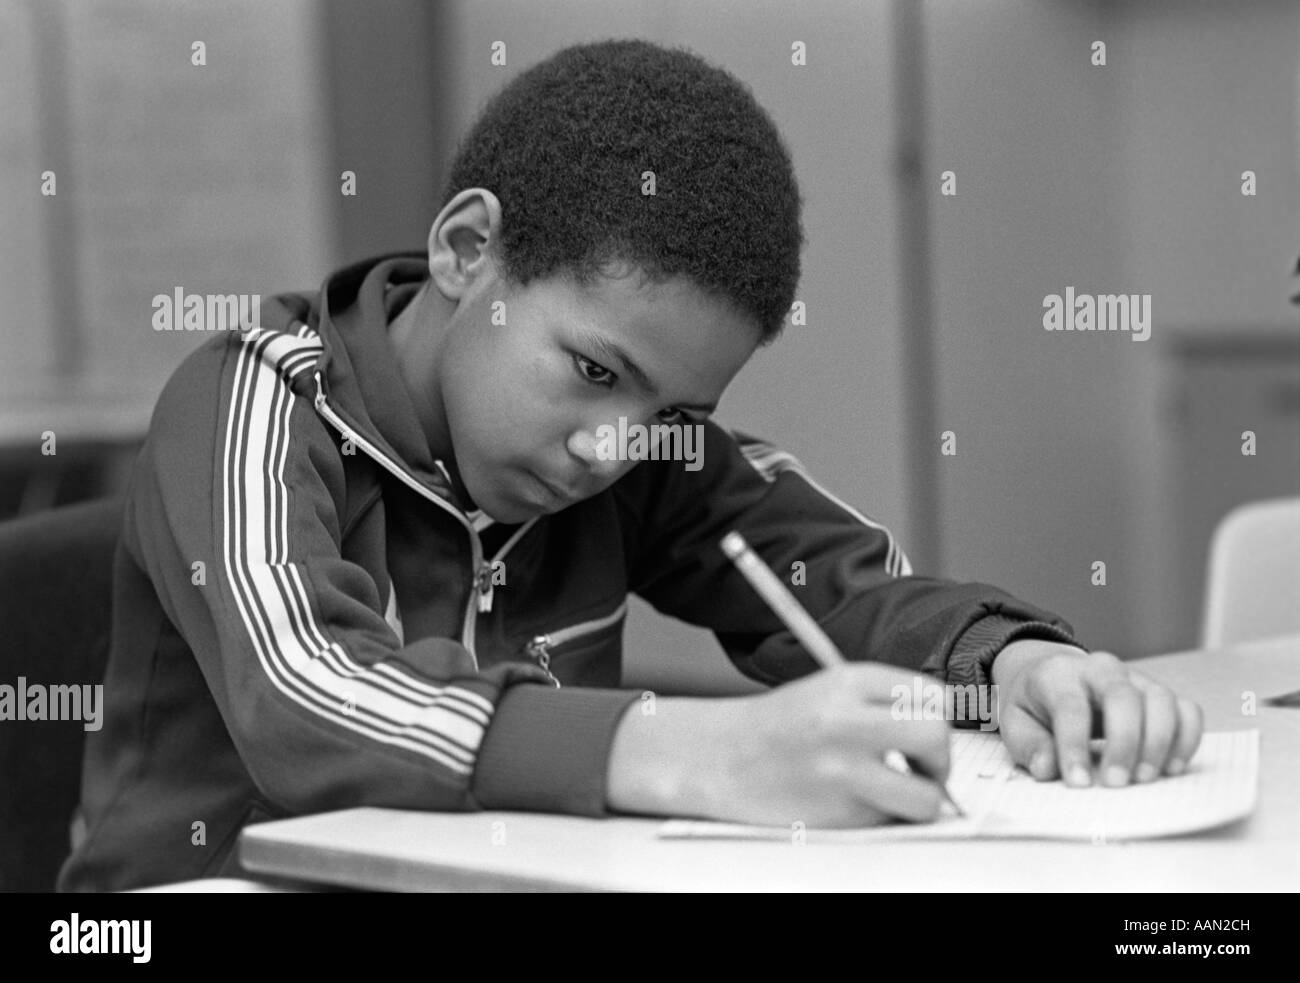 1980s AFRICAN AMERICAN MALE GRADE SCHOOL STUDENT SITTING AT DESK IN CLASSROOM WRITING Stock Photo